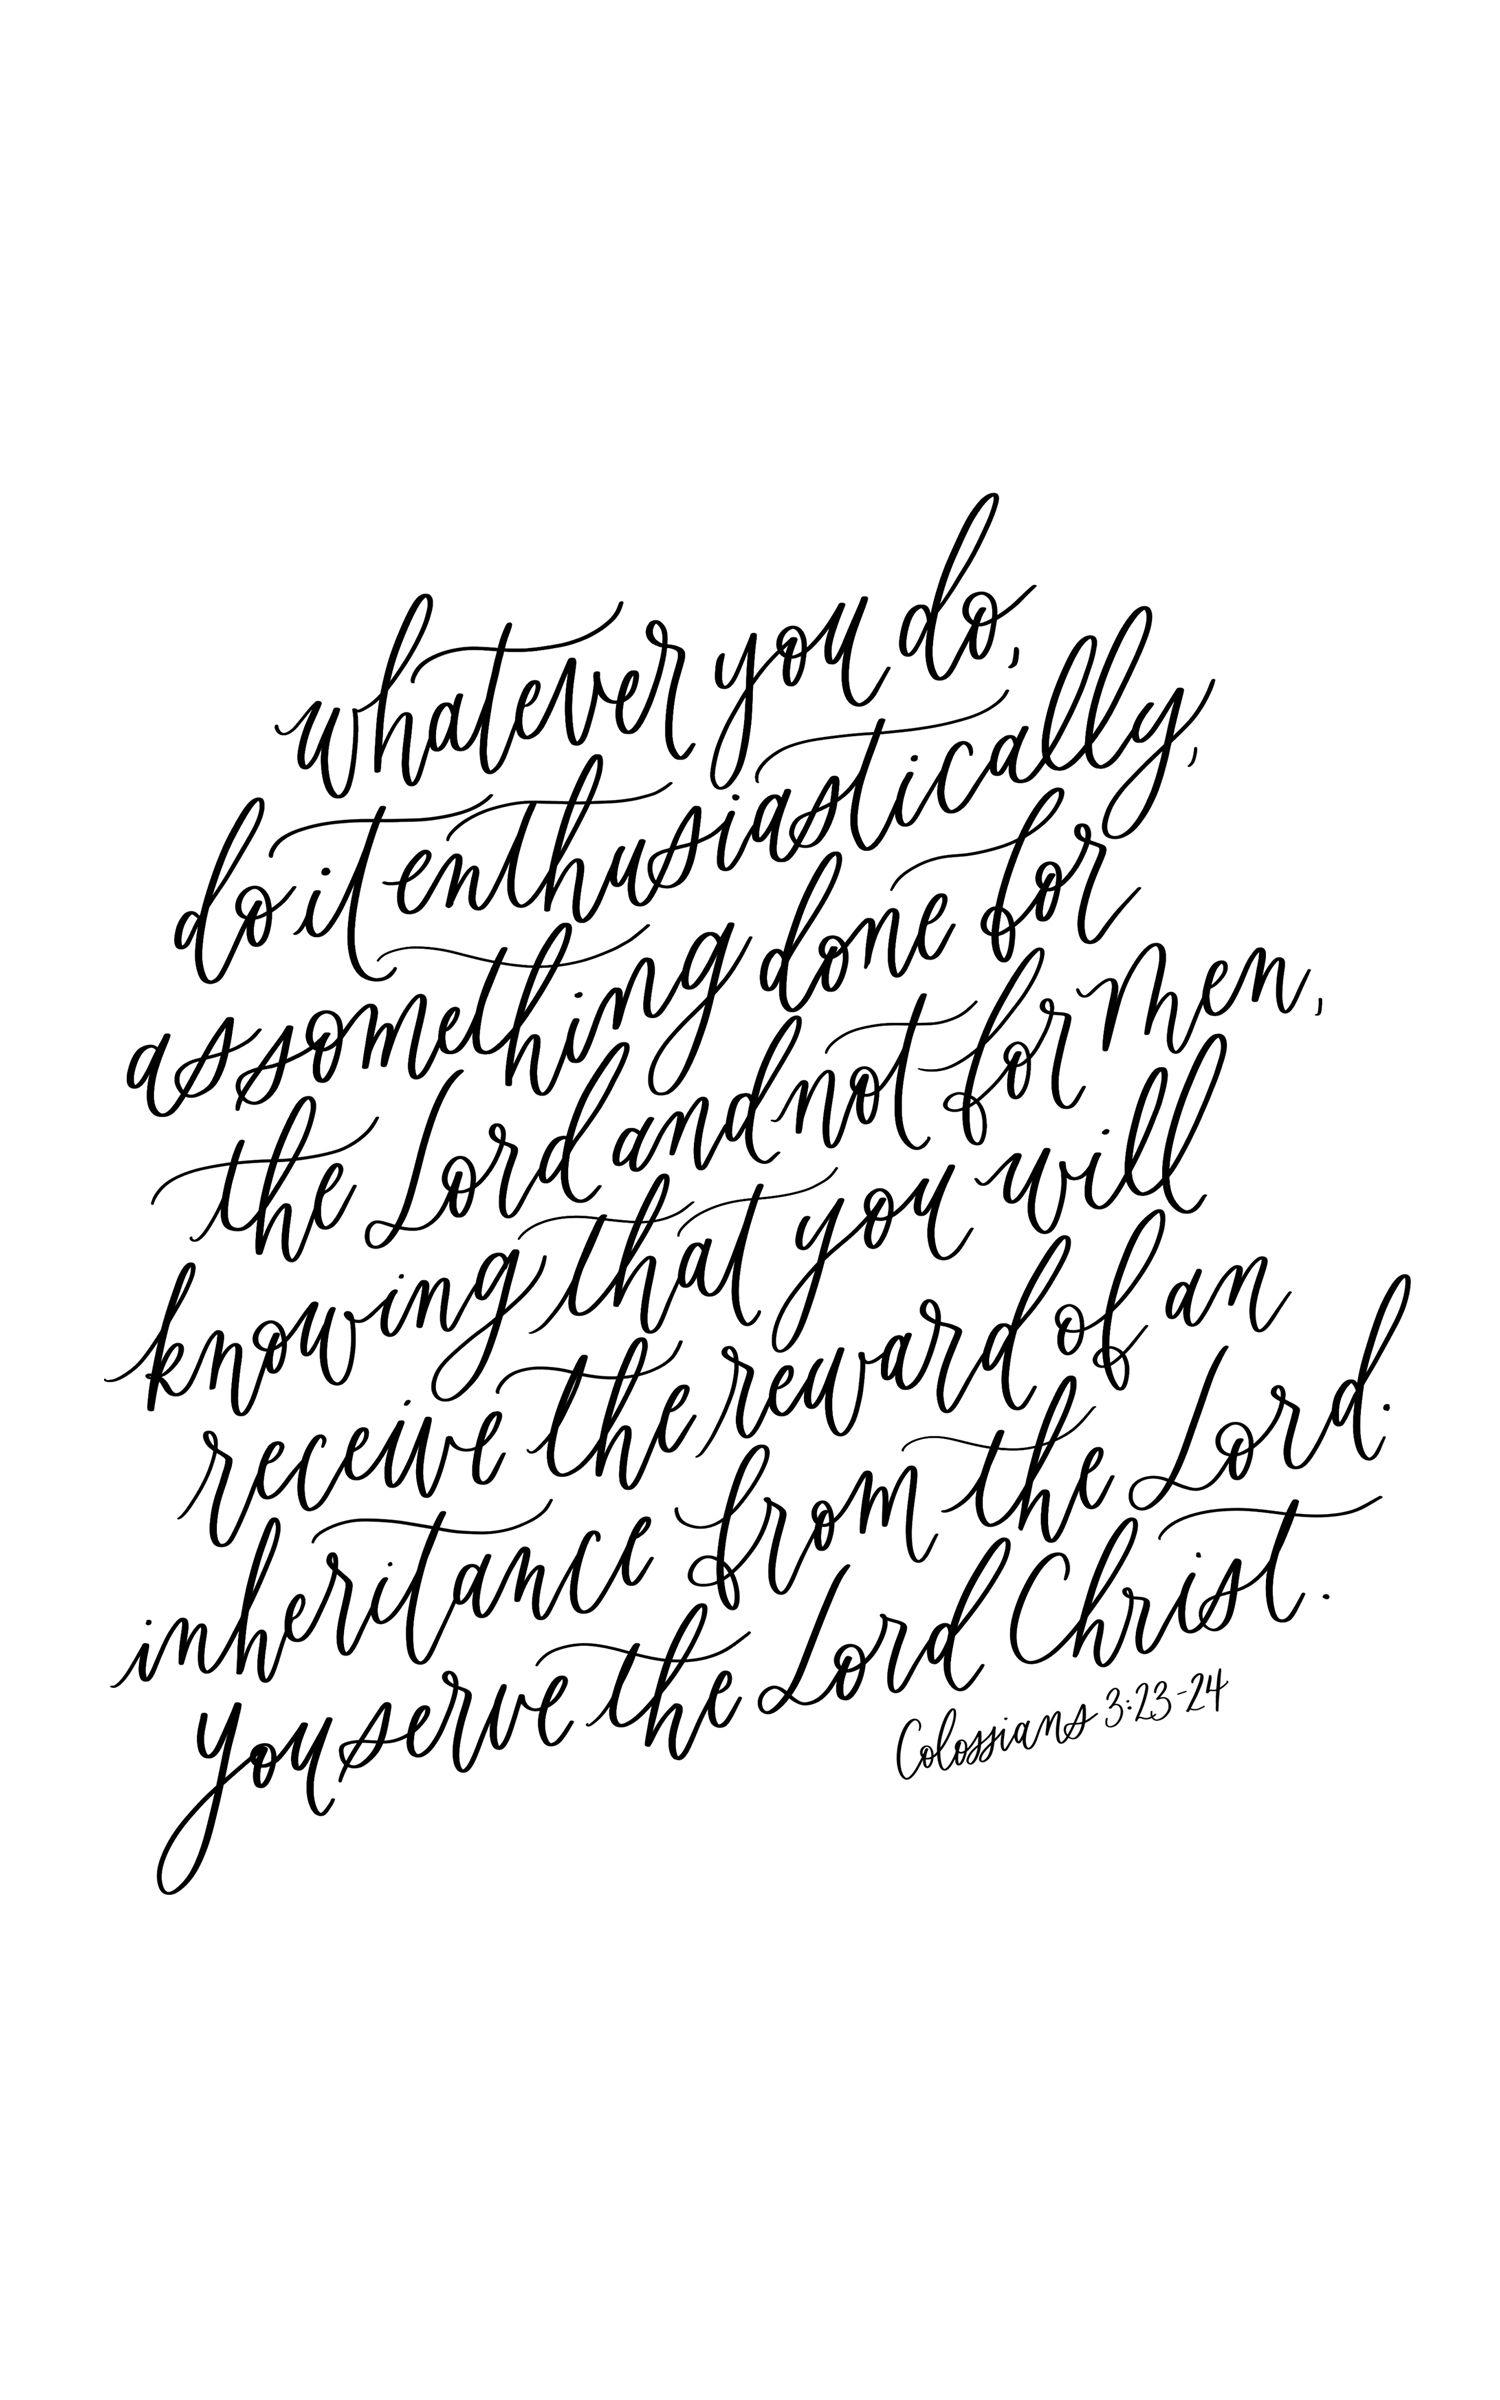 Colossians 3:23- calligraphy quote, handlettering bible verse